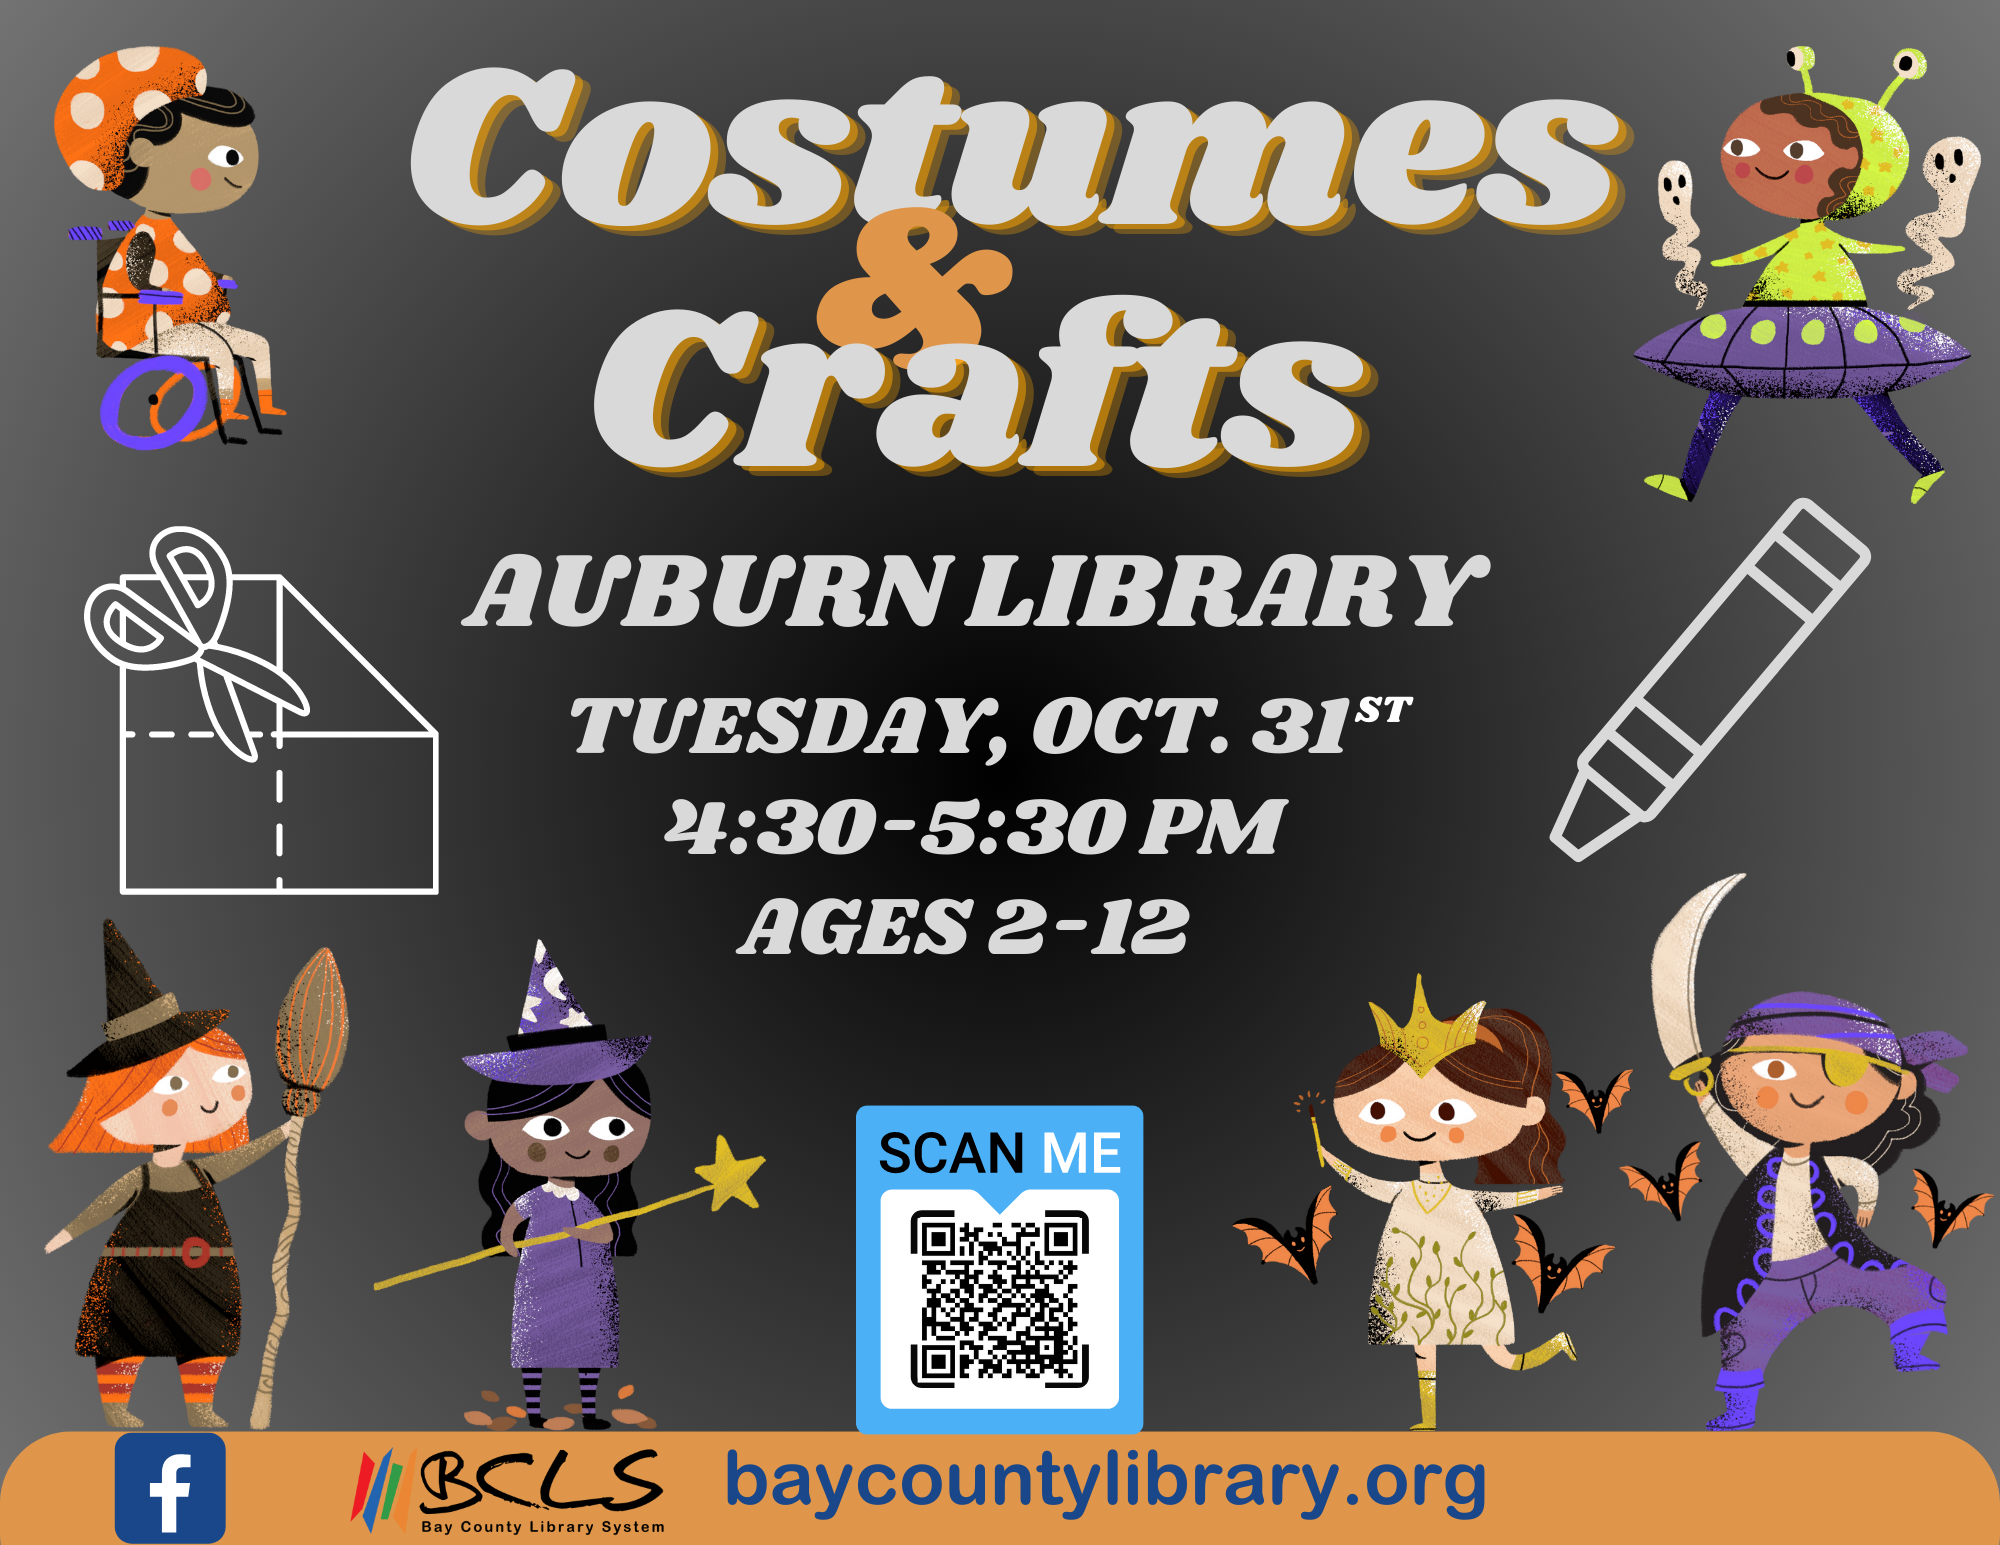 Costumes and Crafts Flyer